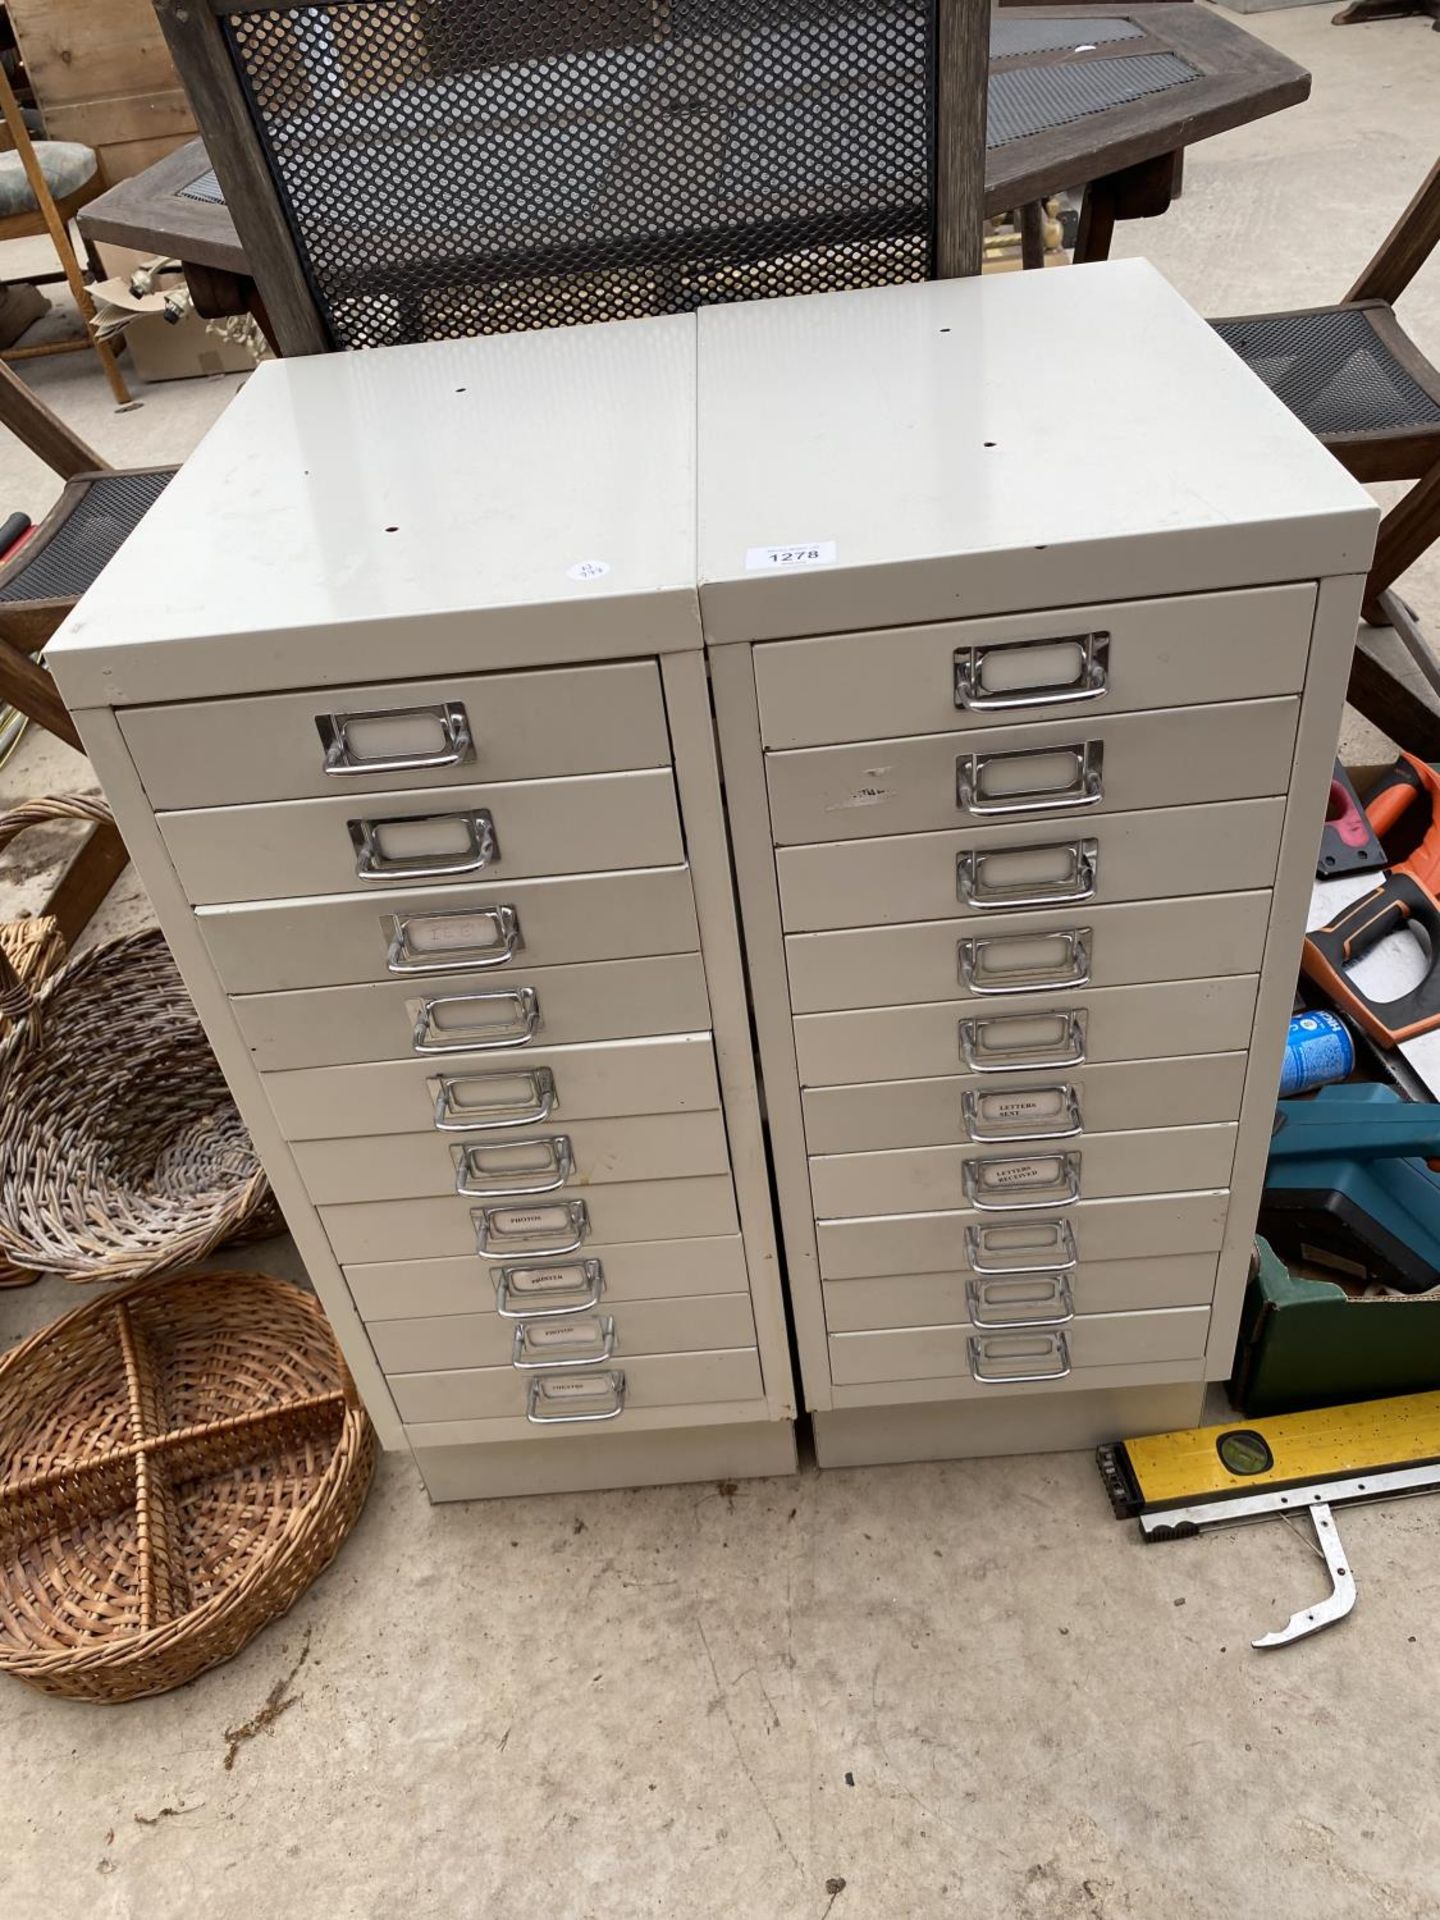 A PAIR OF MINITURE TEN DRAWER FILING CABINETS